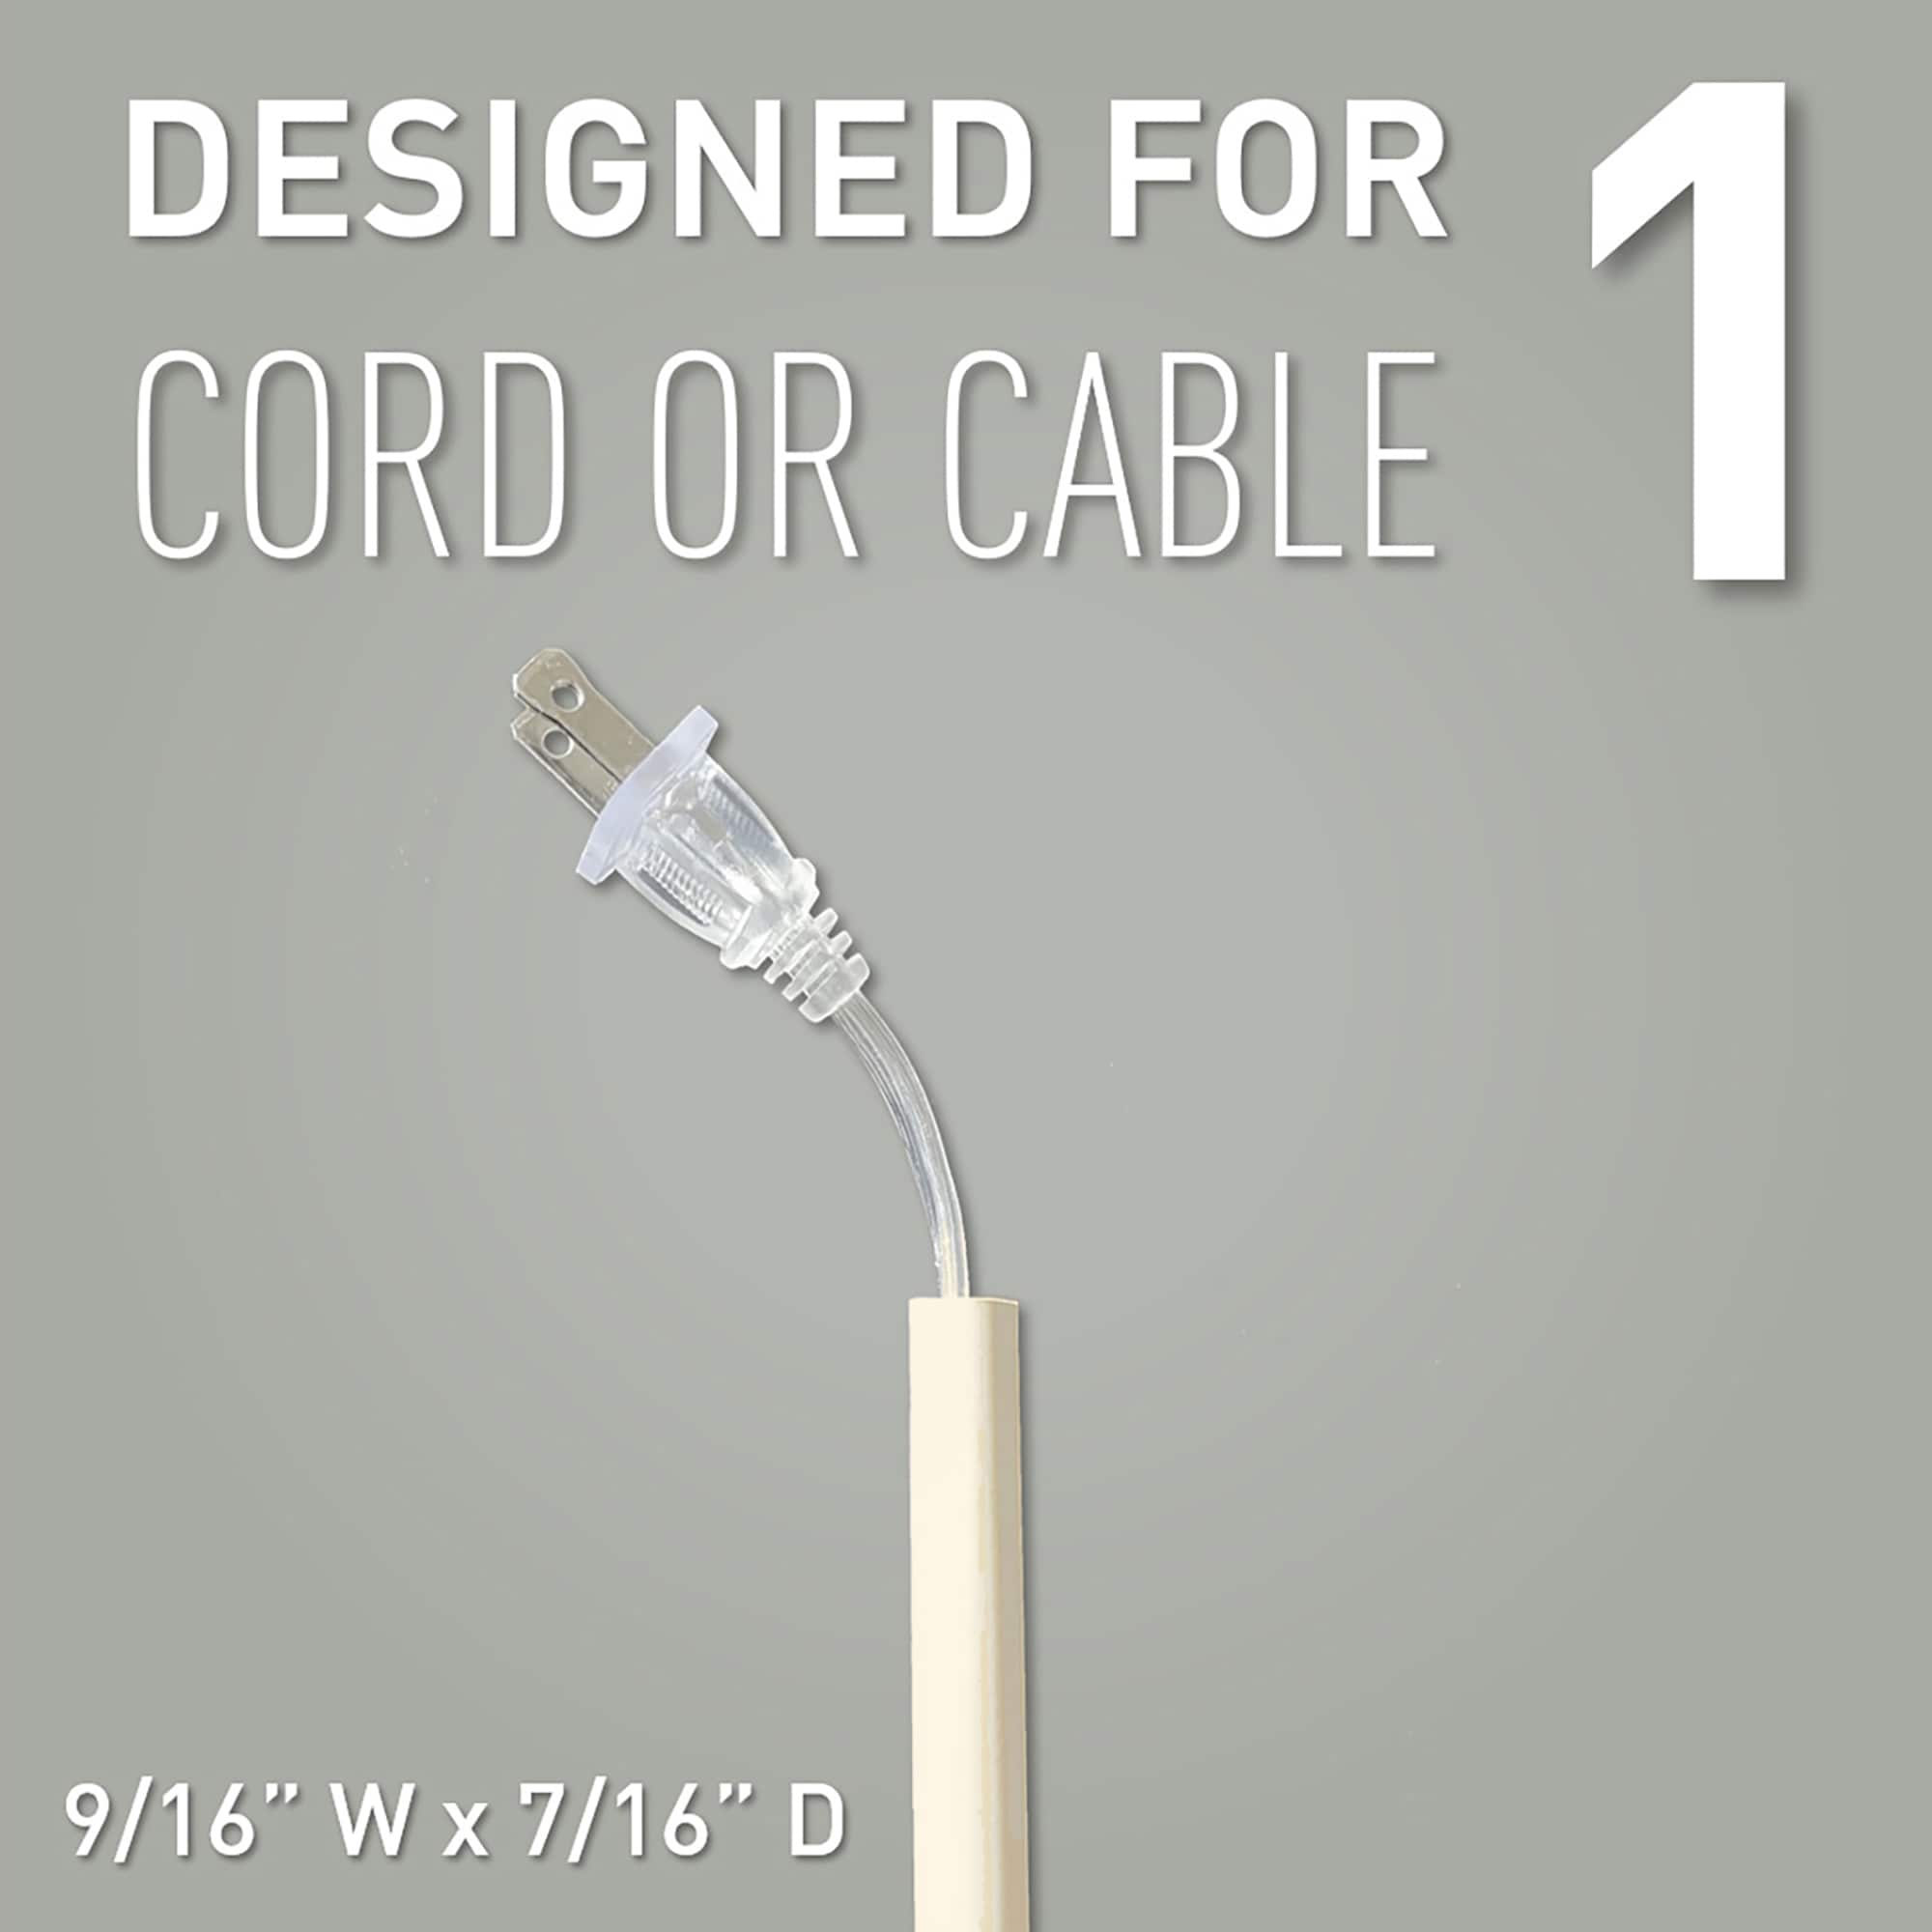 Legrand CordMate 5-ft x 0.56-in PVC White Straight Channel Cord